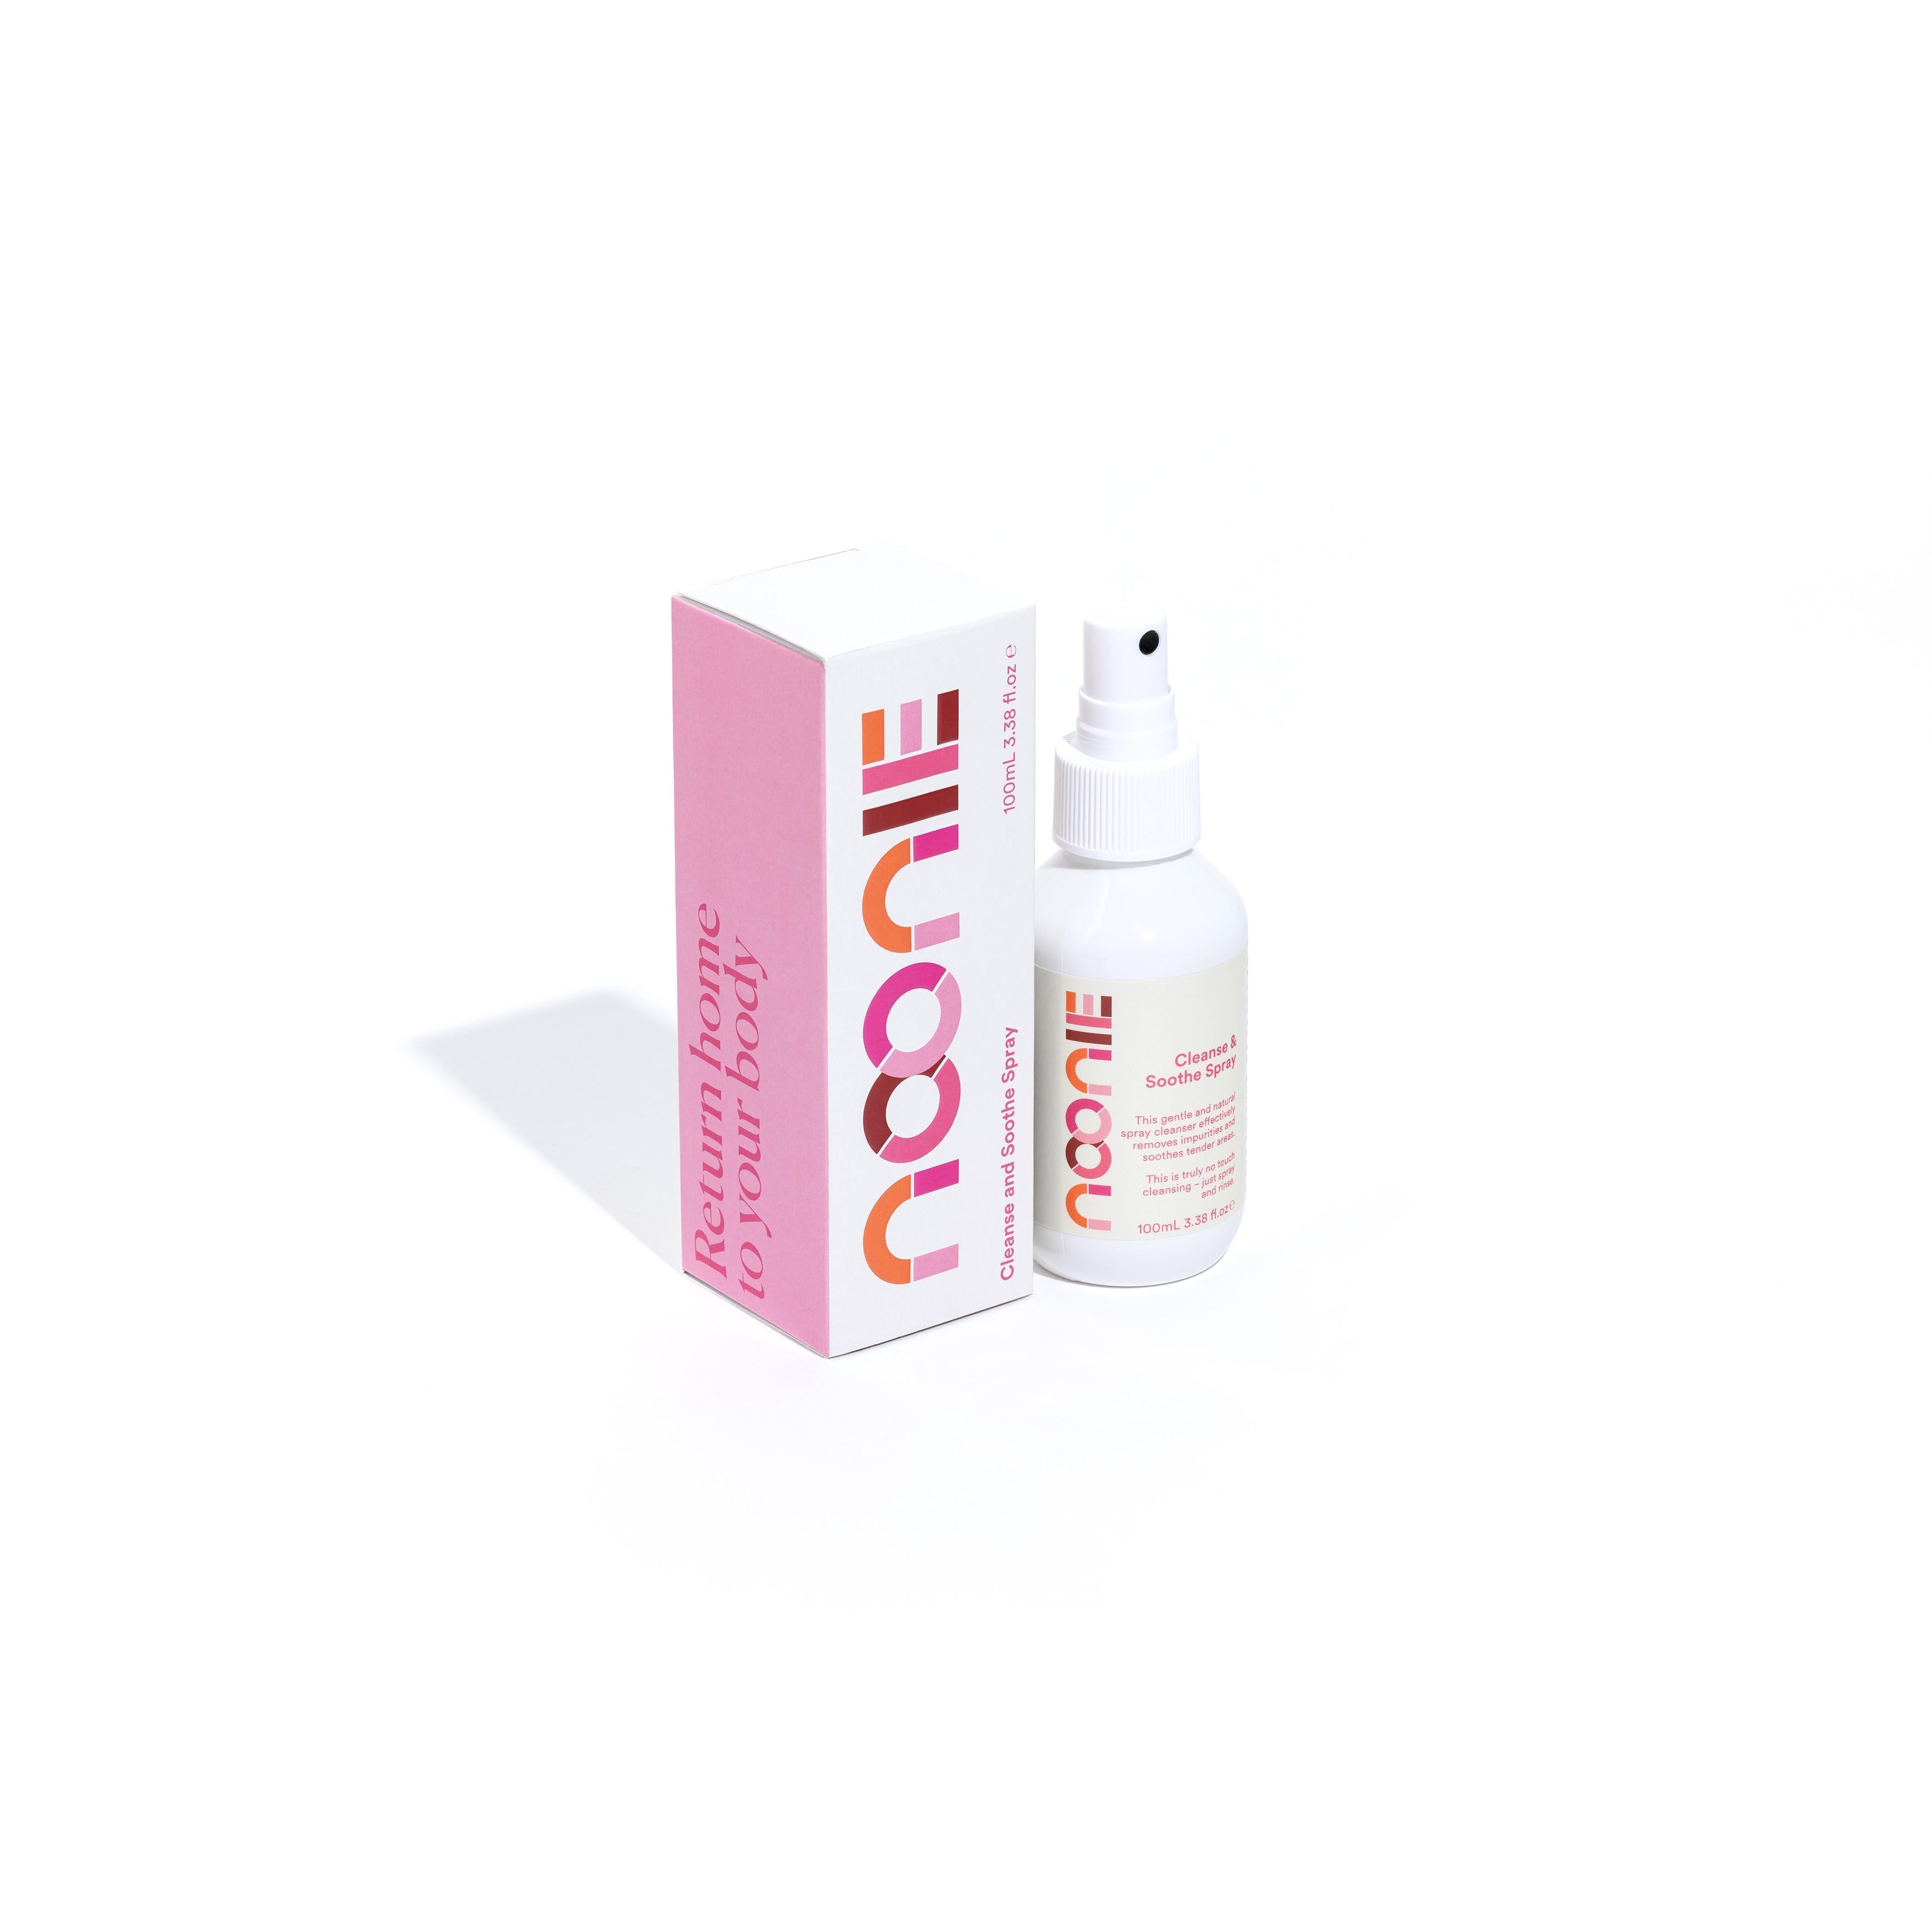 Noonie Cleanse and Soothe Perineal Spray with Packaging